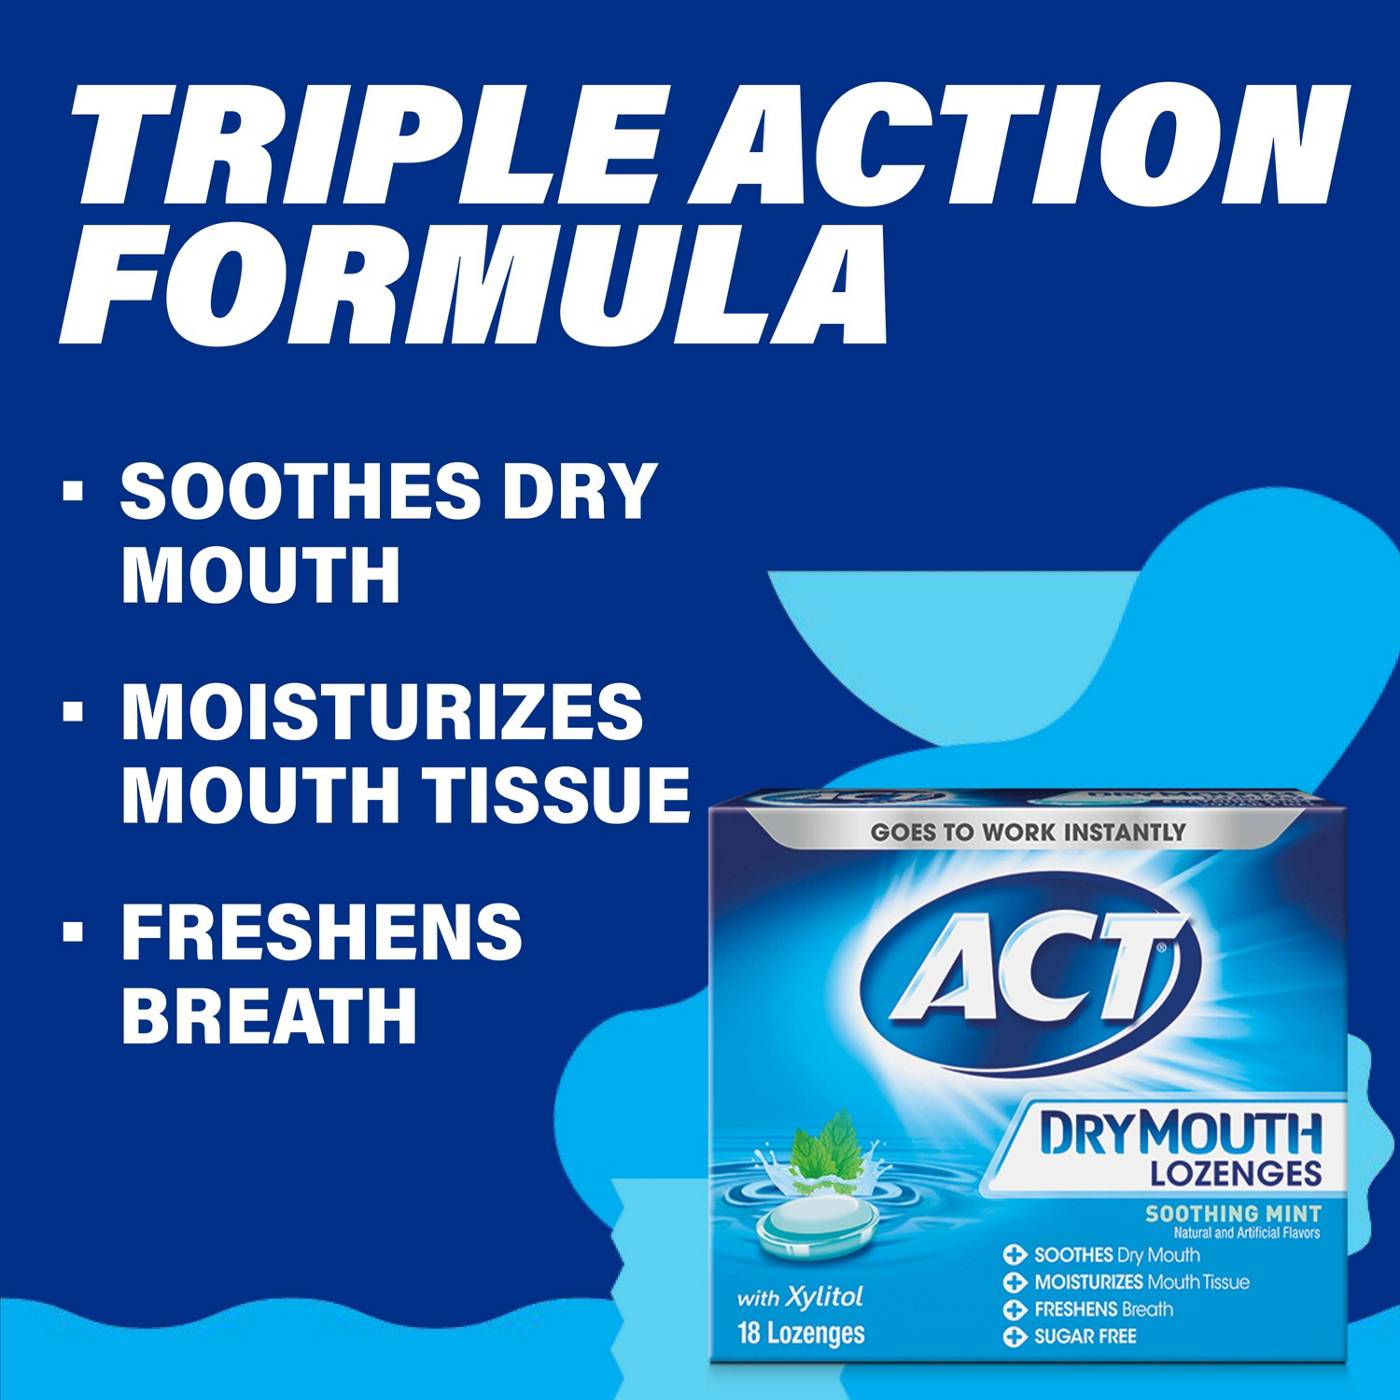 ACT Dry Mouth Lozenges with Xylitol - Soothing Mint; image 5 of 5